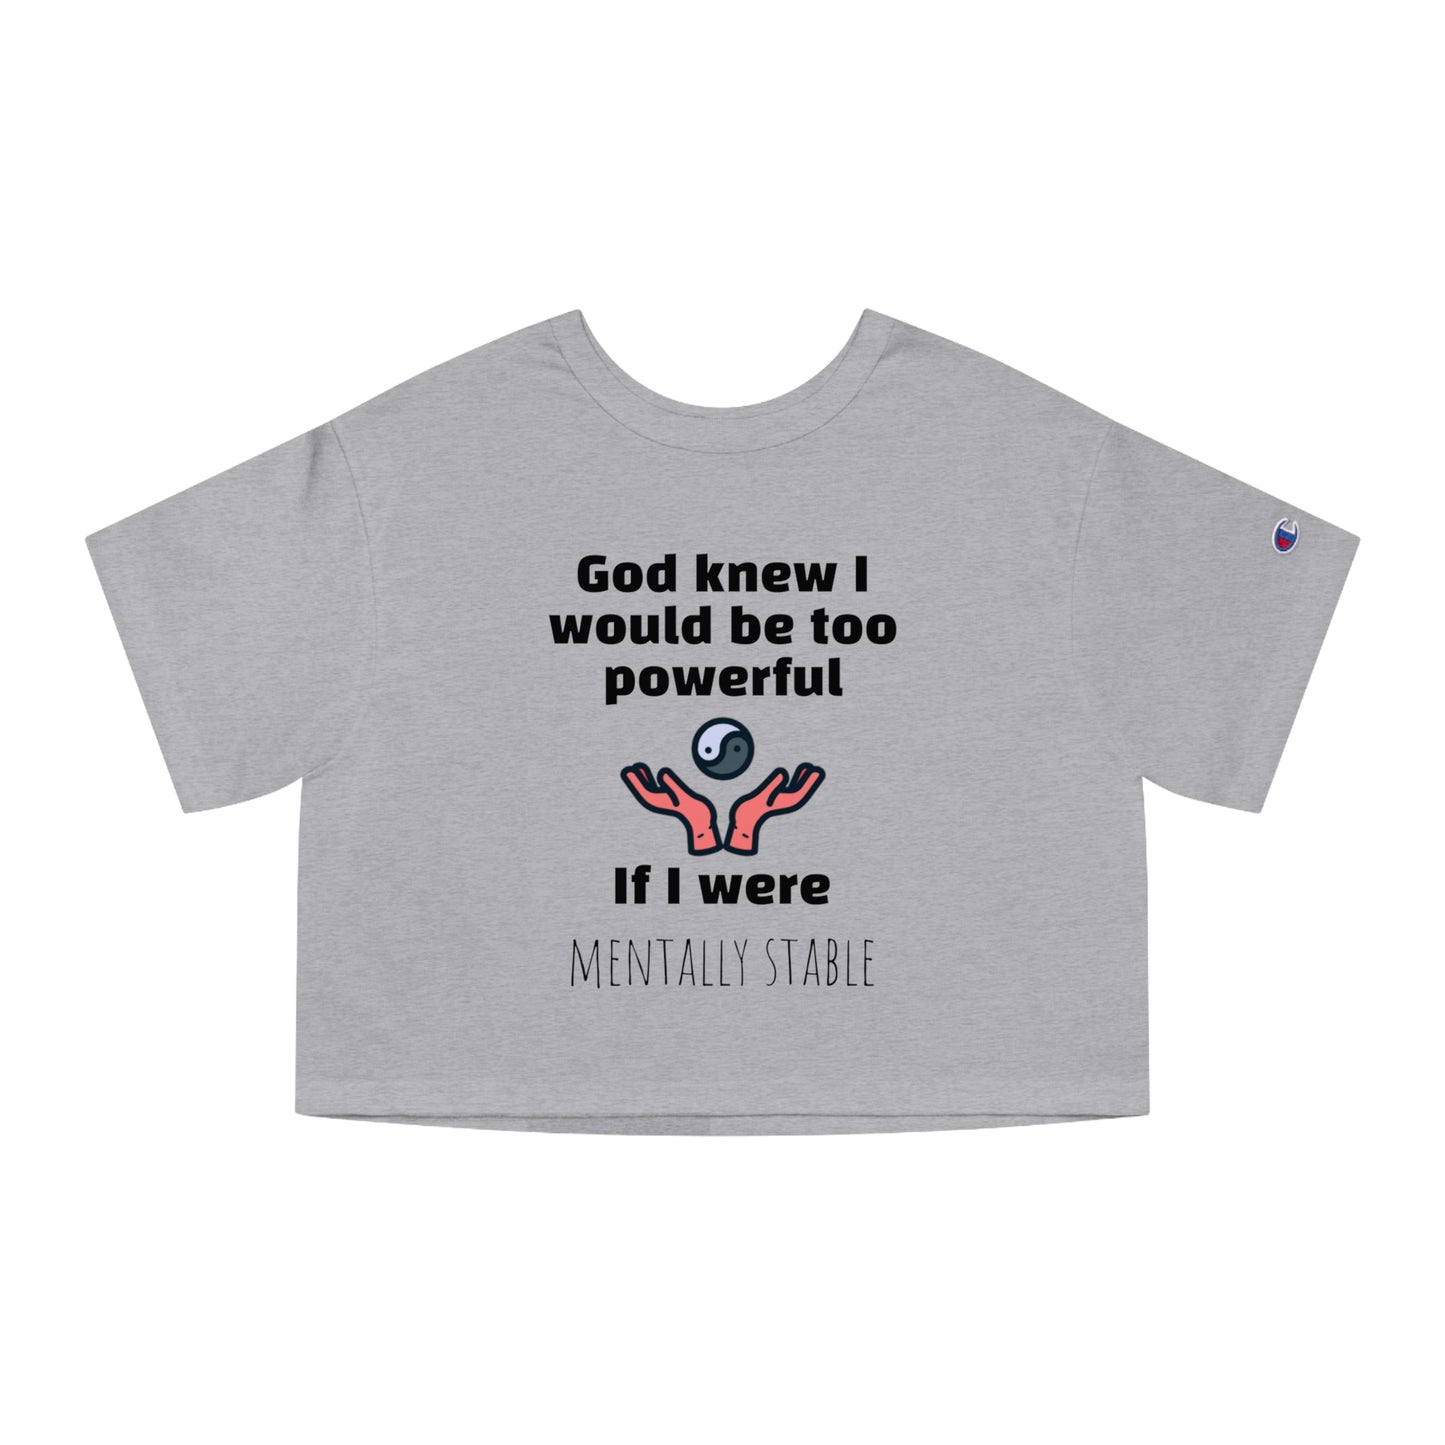 "God knew I would be too powerful if I were mentally stable" - Champion™ crop top